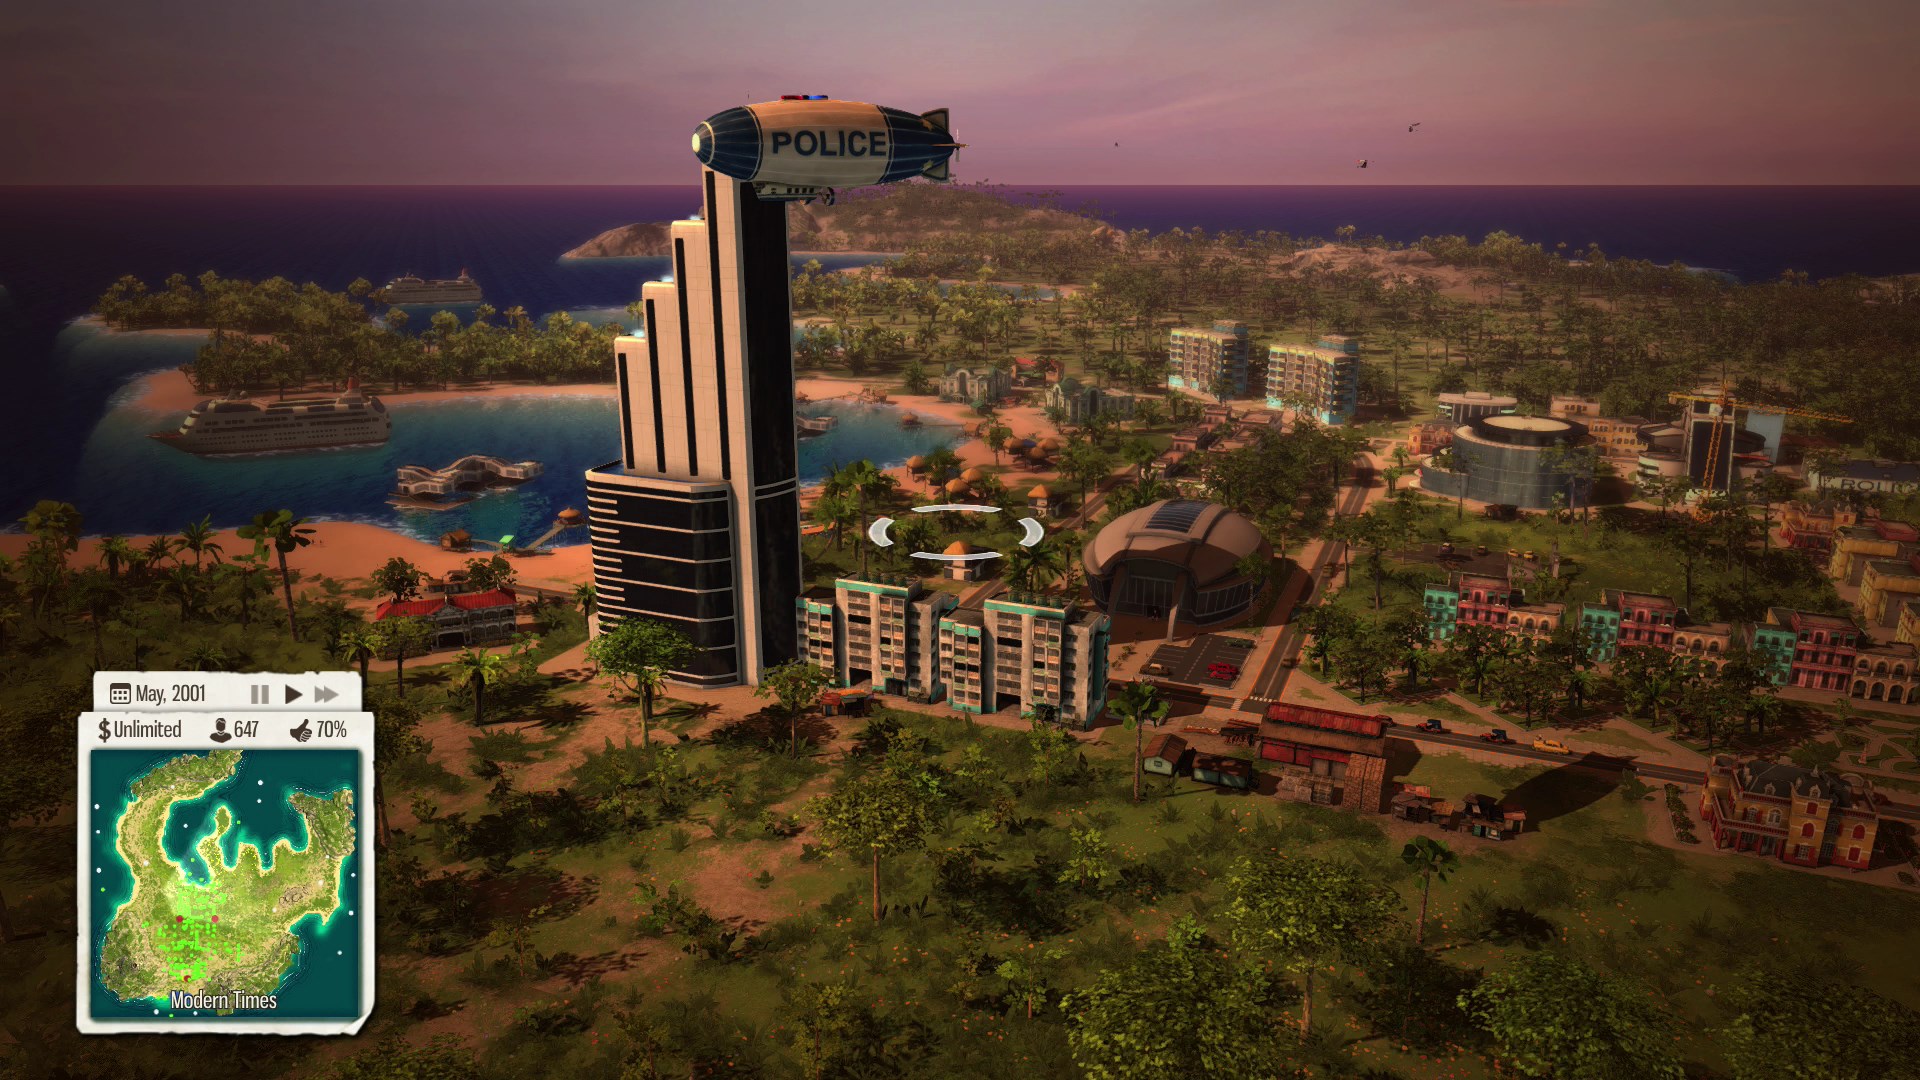 ❗TROPICO 5 - COMPLETE COLLECTION❗XBOX ONE/X|S🔑KEY+VPN❗